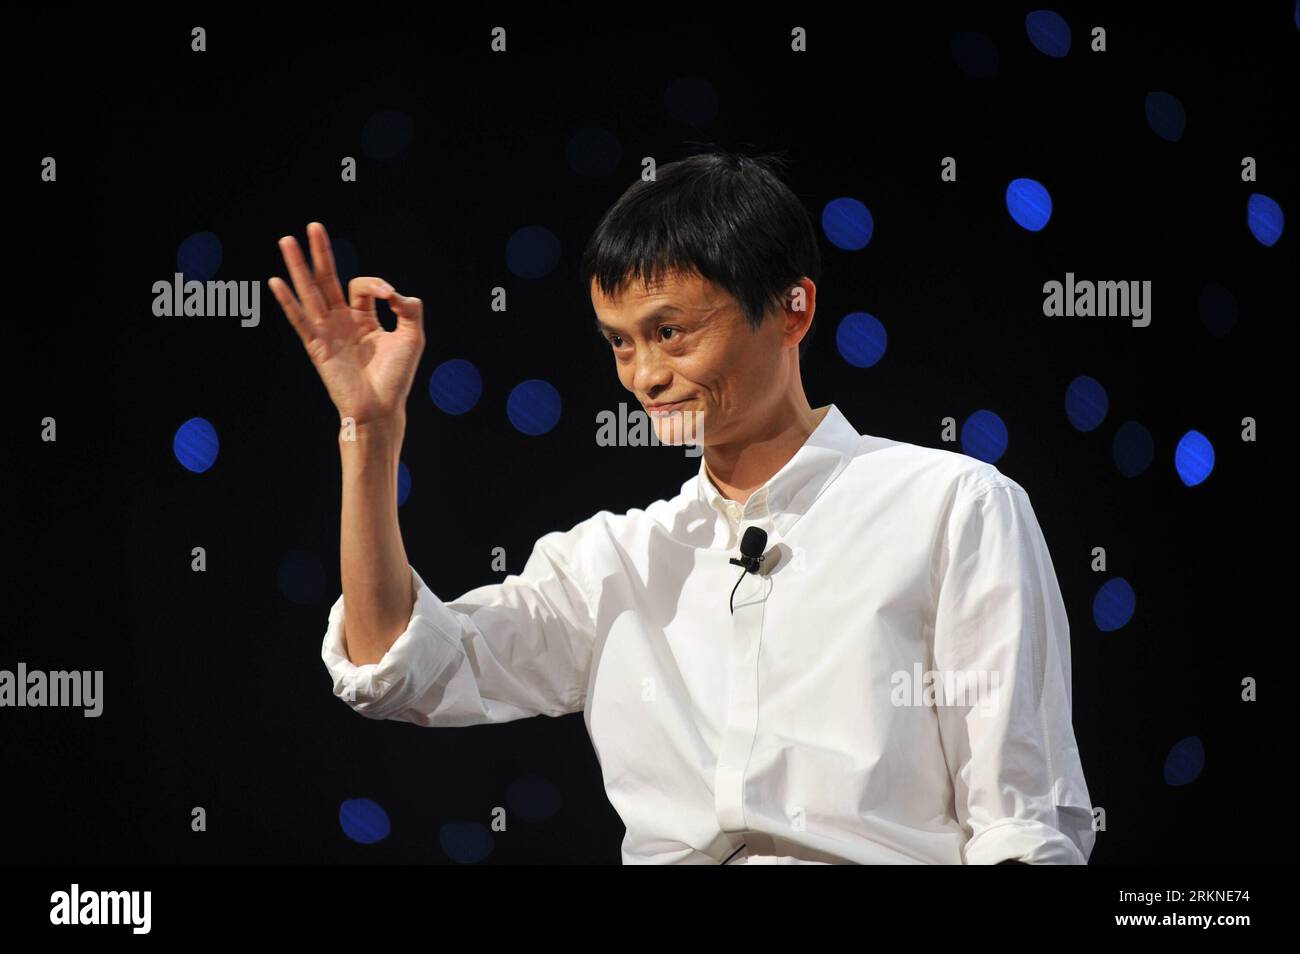 Bildnummer: 57100565  Datum: 10.09.2011  Copyright: imago/Xinhua (120223) -- HANGZHOU, Feb. 23,  (Xinhua) -- File photo taken on Sept. 10, 2011 shows Jack Ma, chairman of Alibaba Group, at Alifest, an enterpreneur summit sponsored by Alibaba, in Hangzhou, capital of east China s Zhejiang Province. Chinese e-commerce giant Alibaba Group has offered to privatize its Hong Kong-listed arm Alibaba.com, Ltd. at a price of 13.5 Hong Kong dollars per share, the companies said in a joint statement released Tuesday night. (Xinhua/Huang Zongzhi) (lfj) CHINA-ALIBABA GROUP-PRIVATIZATION PLAN (CN) PUBLICATI Stock Photo